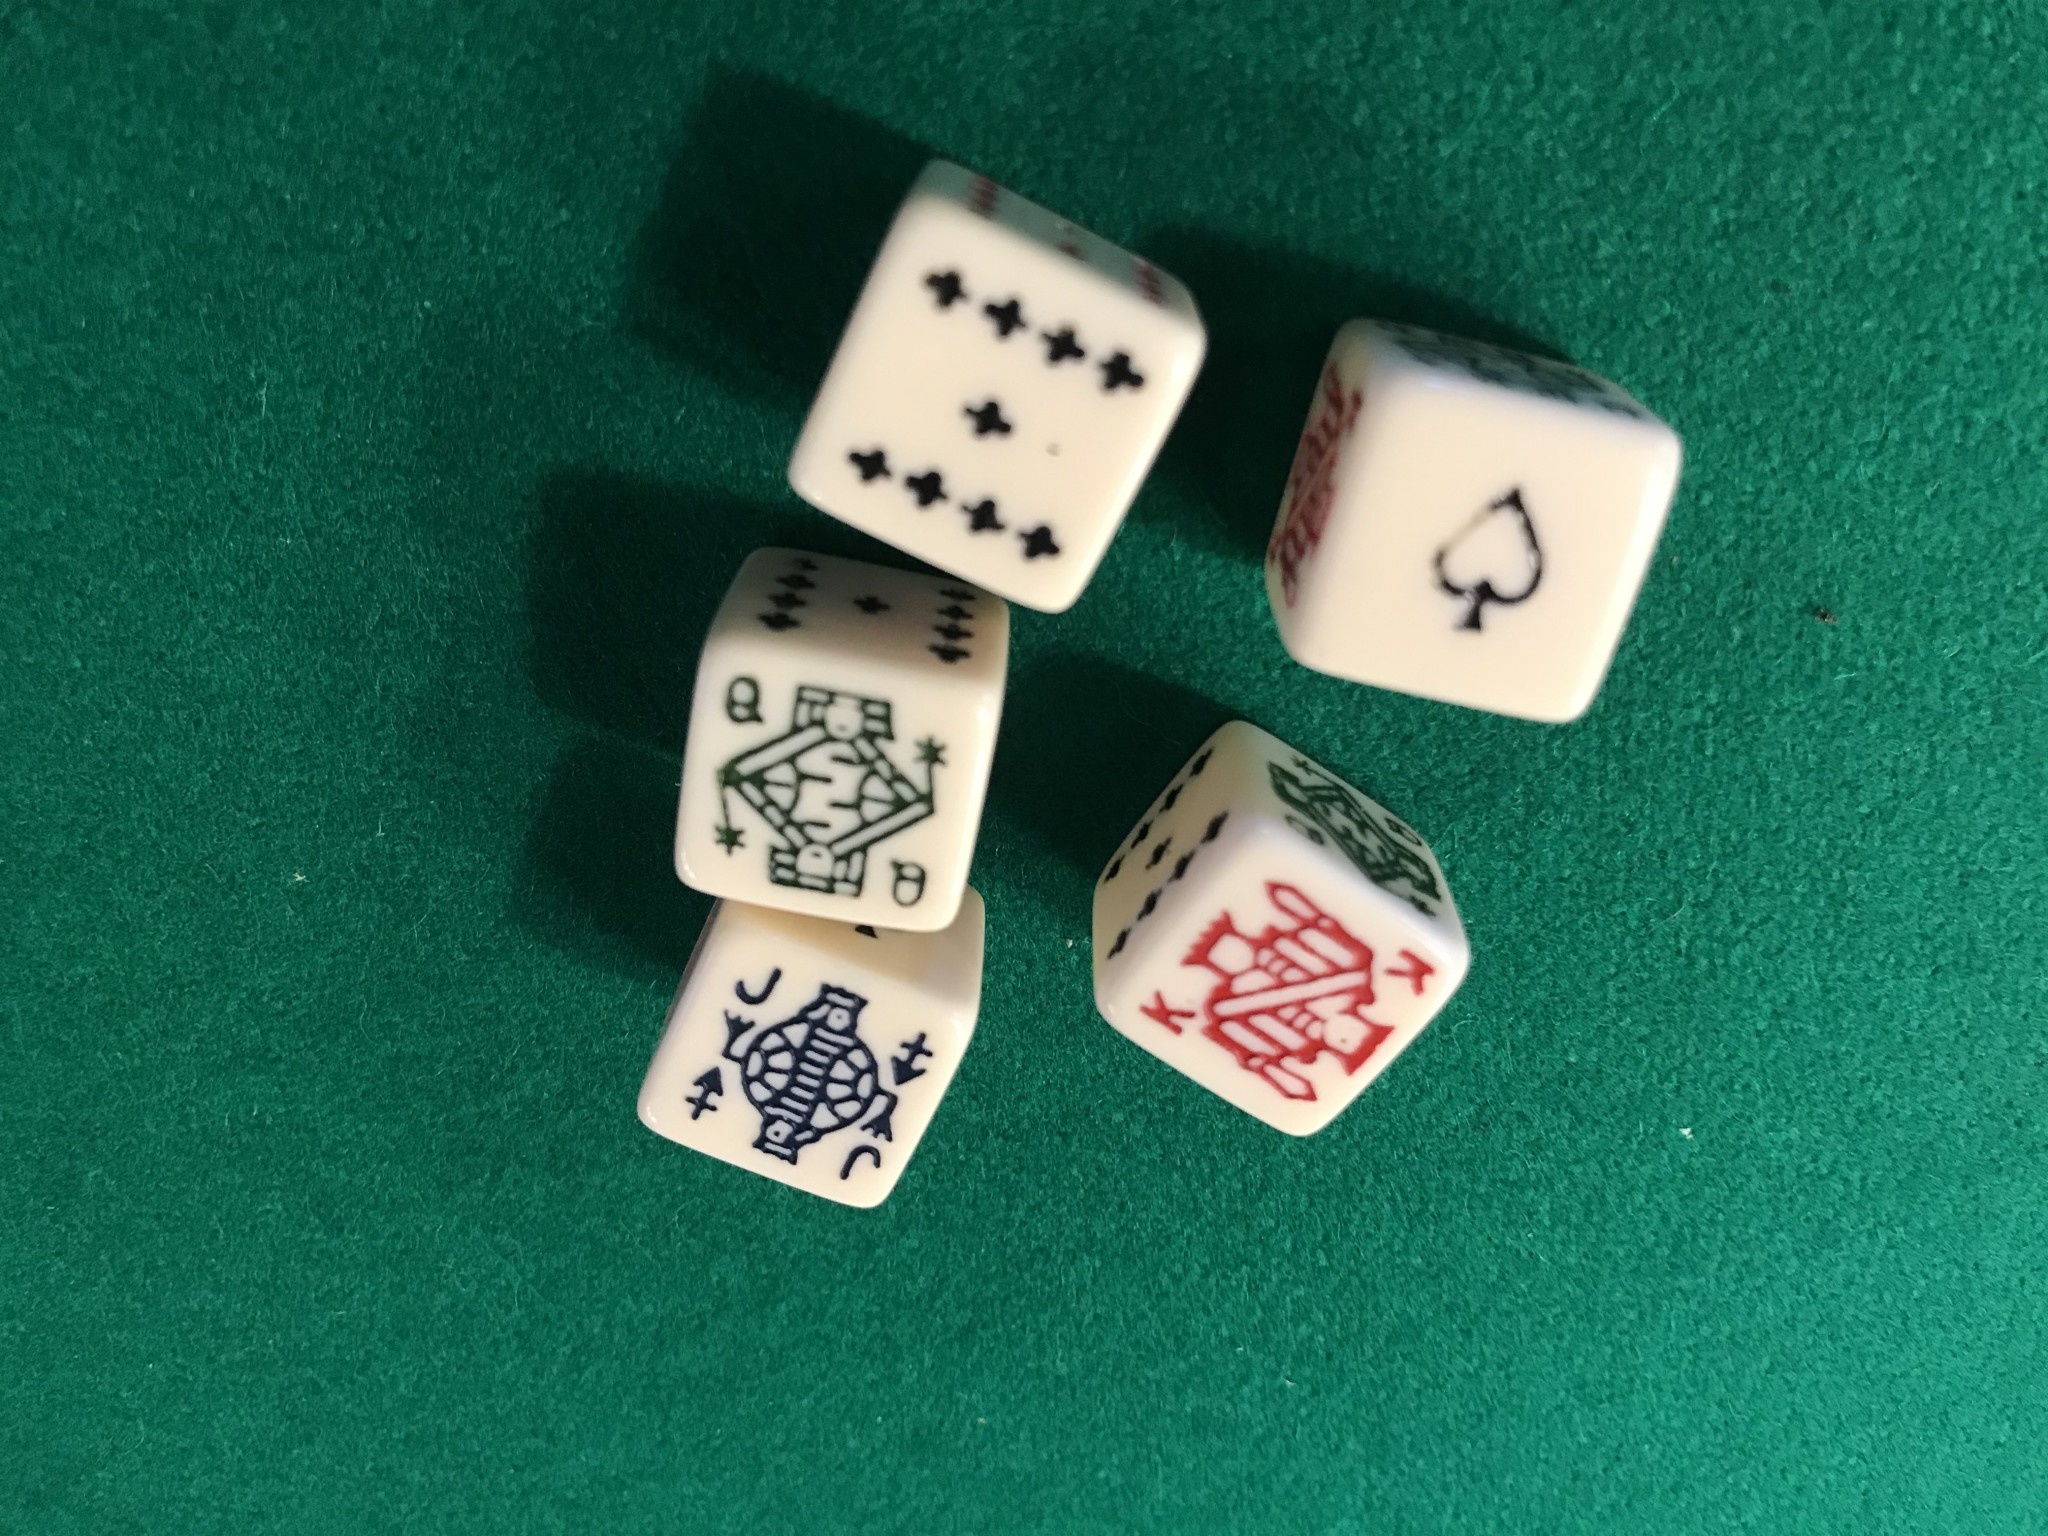 Poker Dice Game: Setup, GamePlay, Special Rules